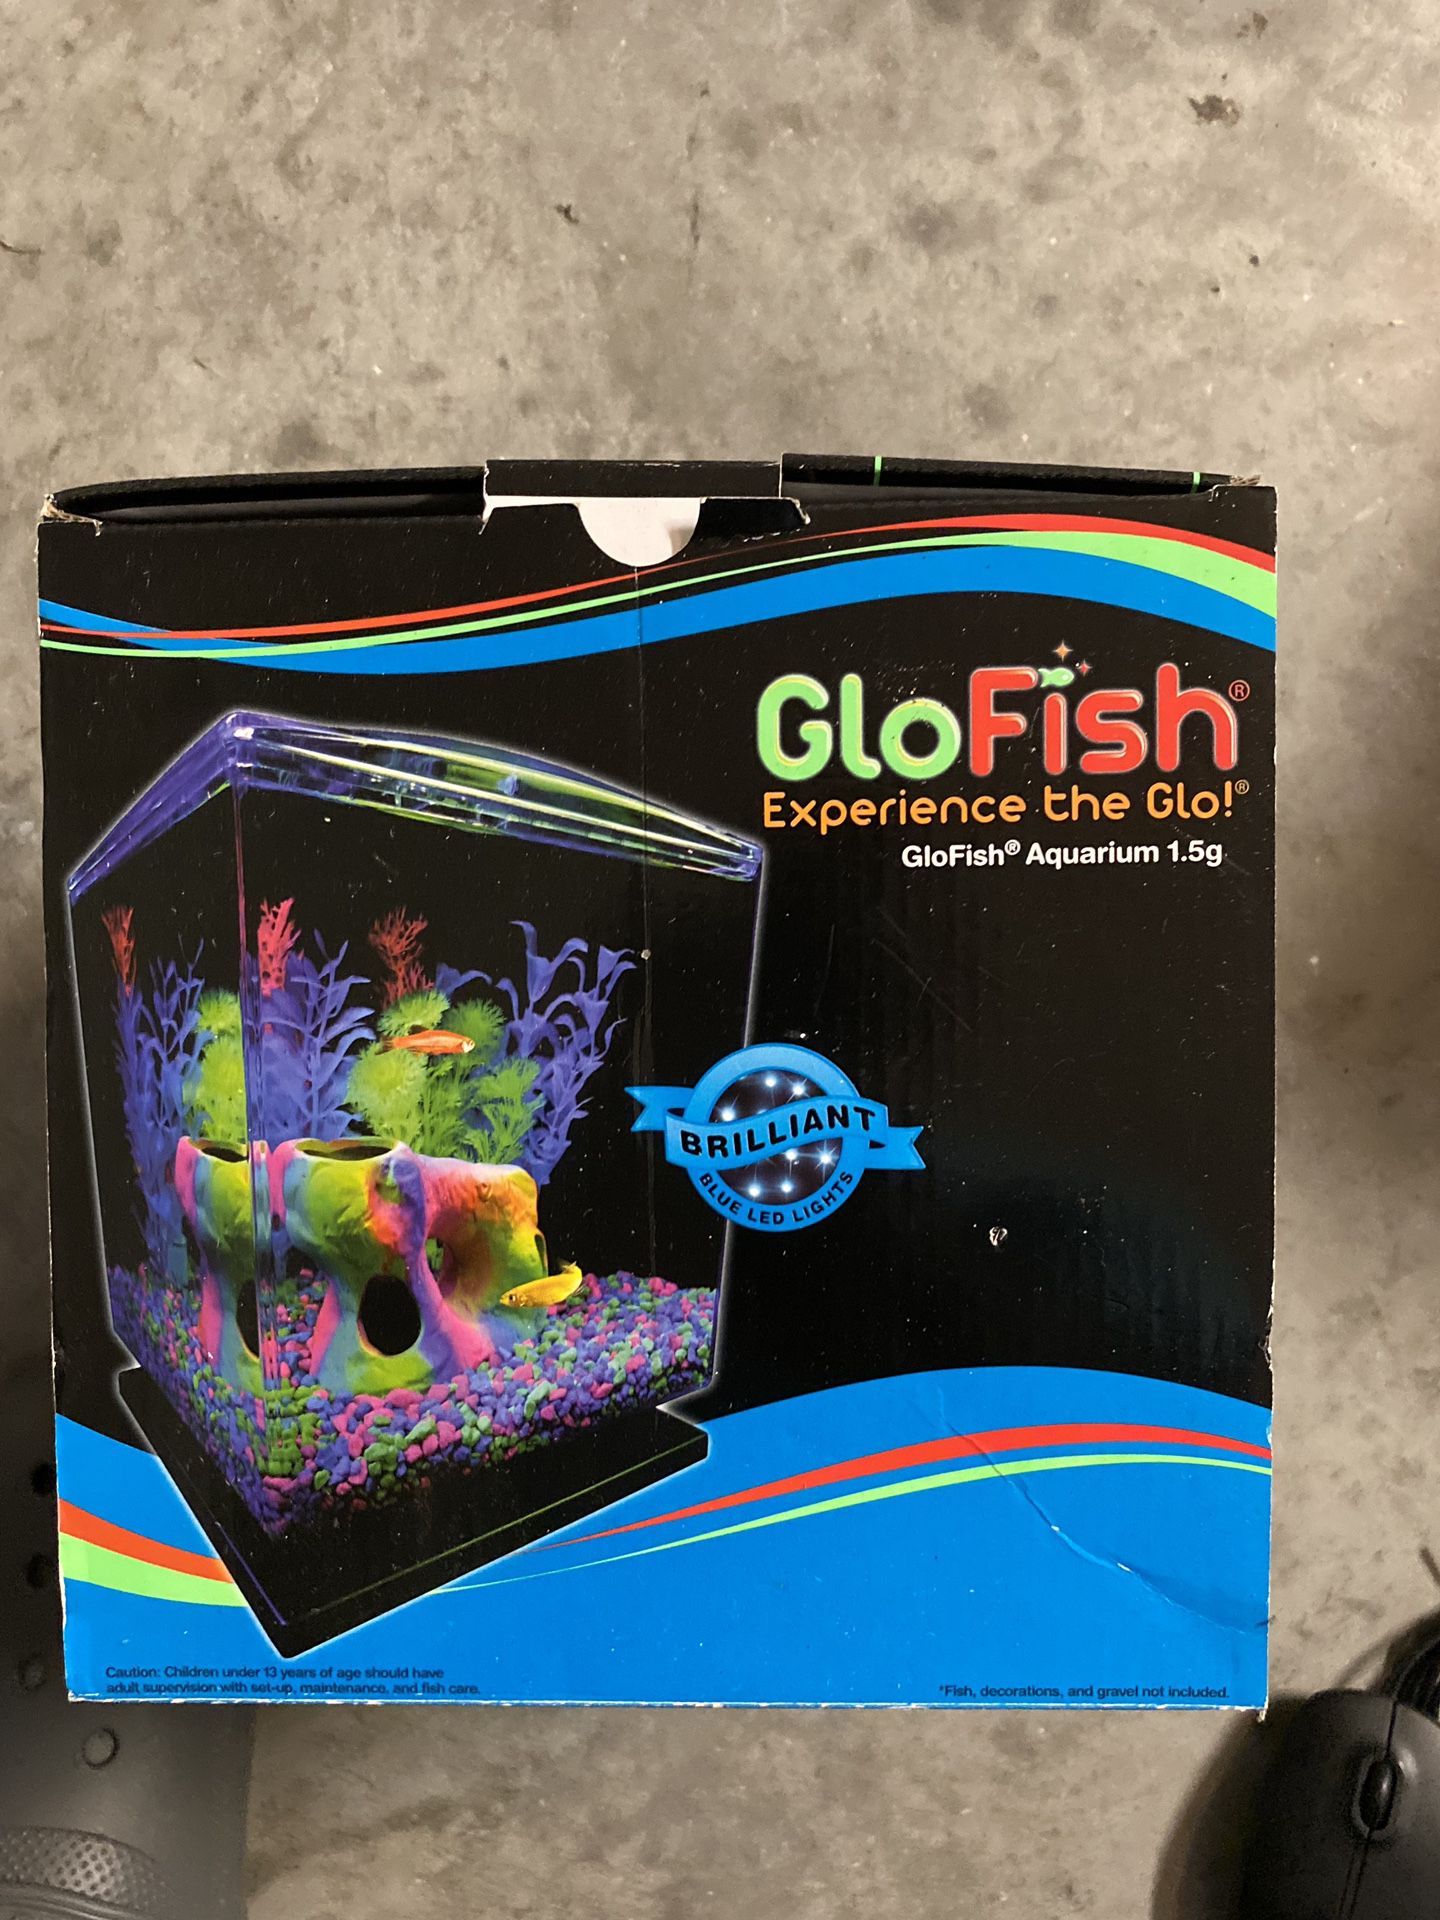 Glow in the dark fish tank + filers, net and water safe